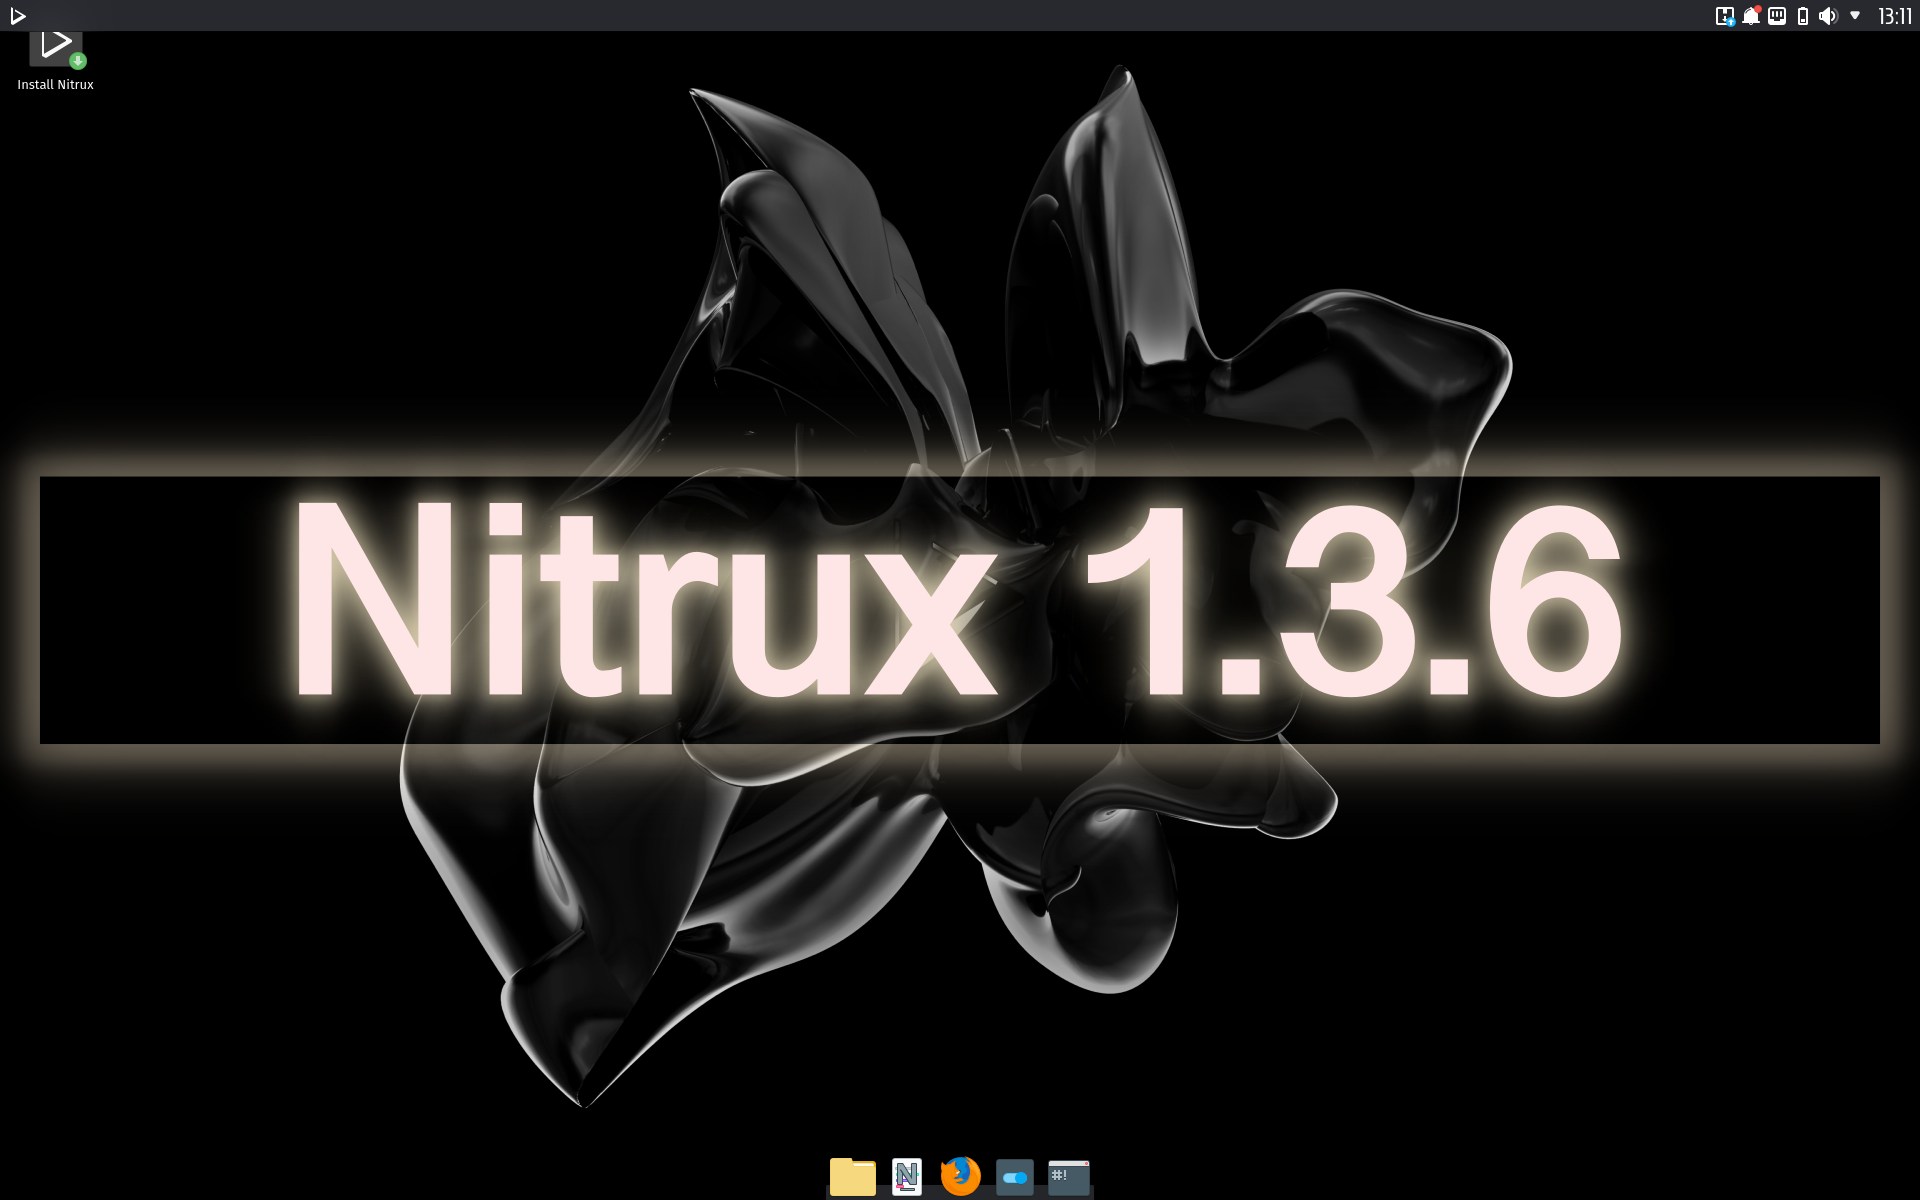 Nitrux 1.3.6 Released with KDE Plasma 5.20.4 and  Linux 5.10 LTS, More AppImages